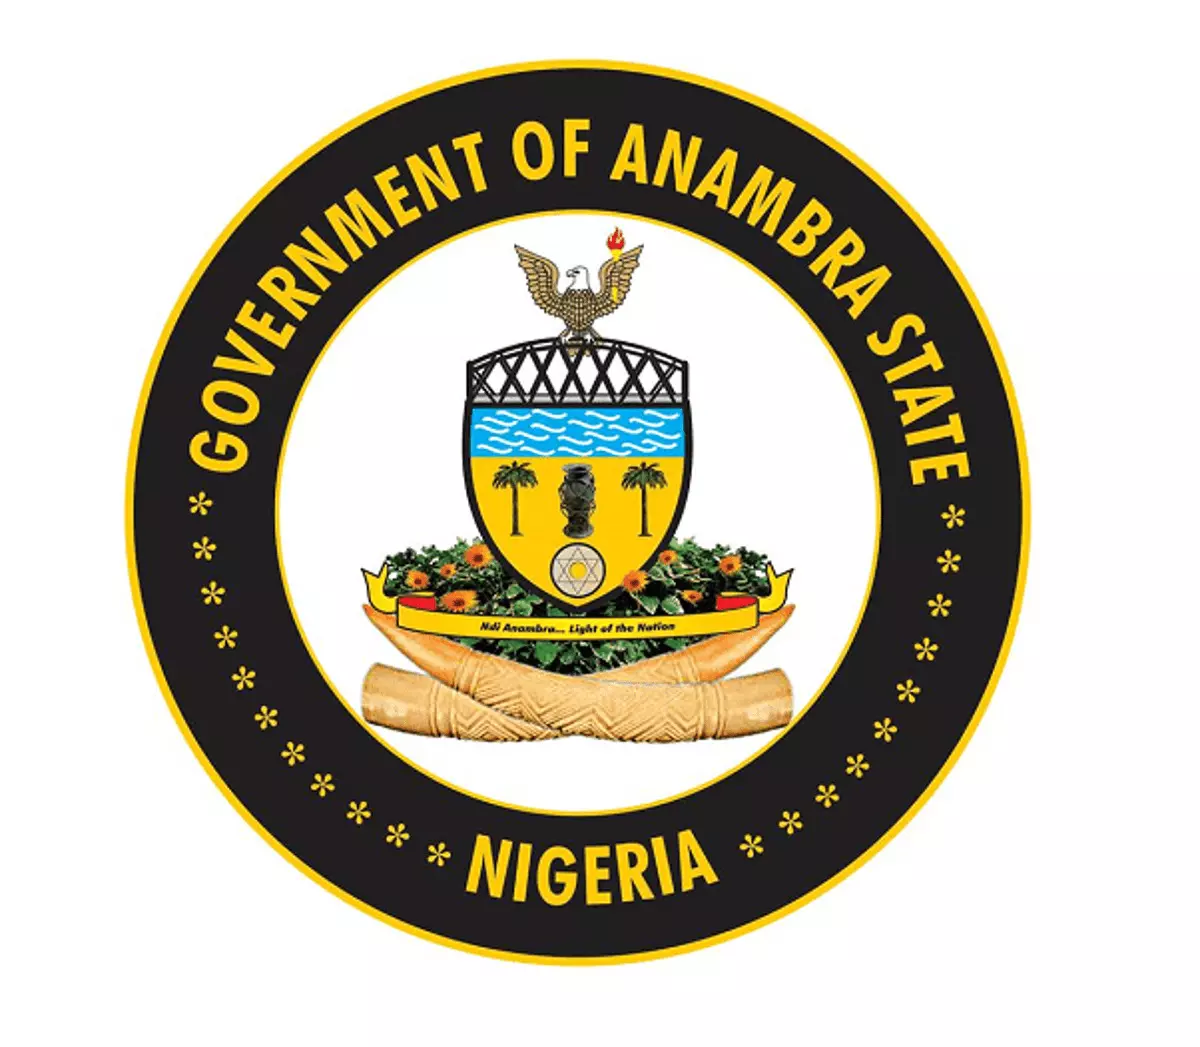 Anambra: Ogbaru incident has emboldened our security drive